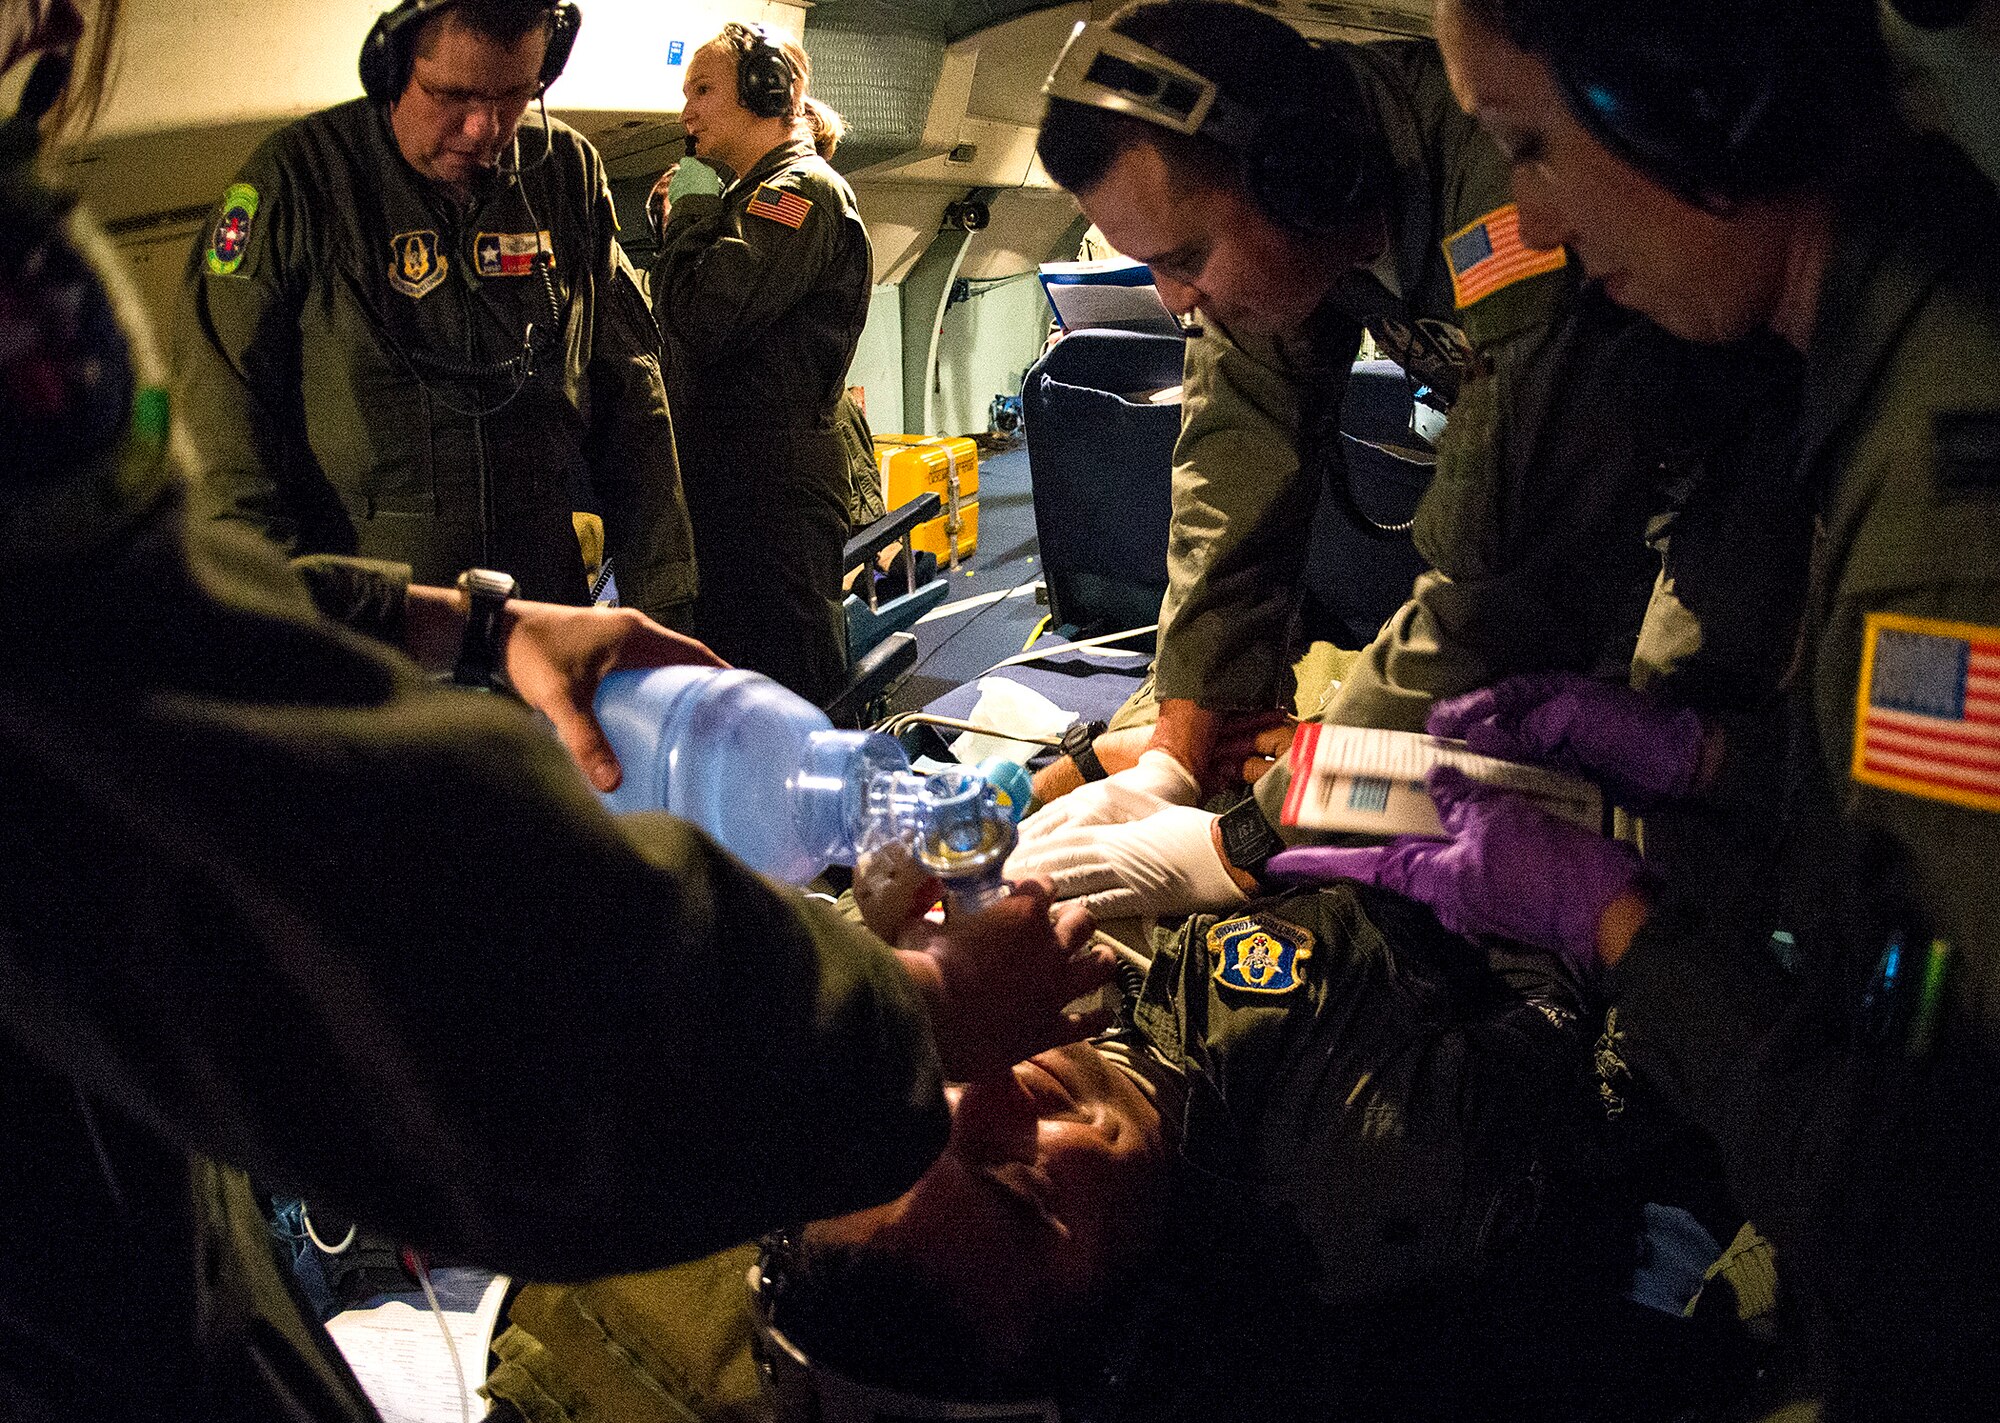 Members from the 433rd Aeromedical Evacuation Squadron perform simulated life saving techniques to a patient in cardiac arrest Oct. 7, 2015 at Joint Base San Antonio-Lackland, Texas. The 433rd AES training mission was the third training flight  in a series of five training evolutions. The primary objective of the flights is to establish aeromedical readiness for the C-5 and identify aeromedical evacuation crew member requirements. (U.S. Air Force photo by Benjamin Faske) (released)